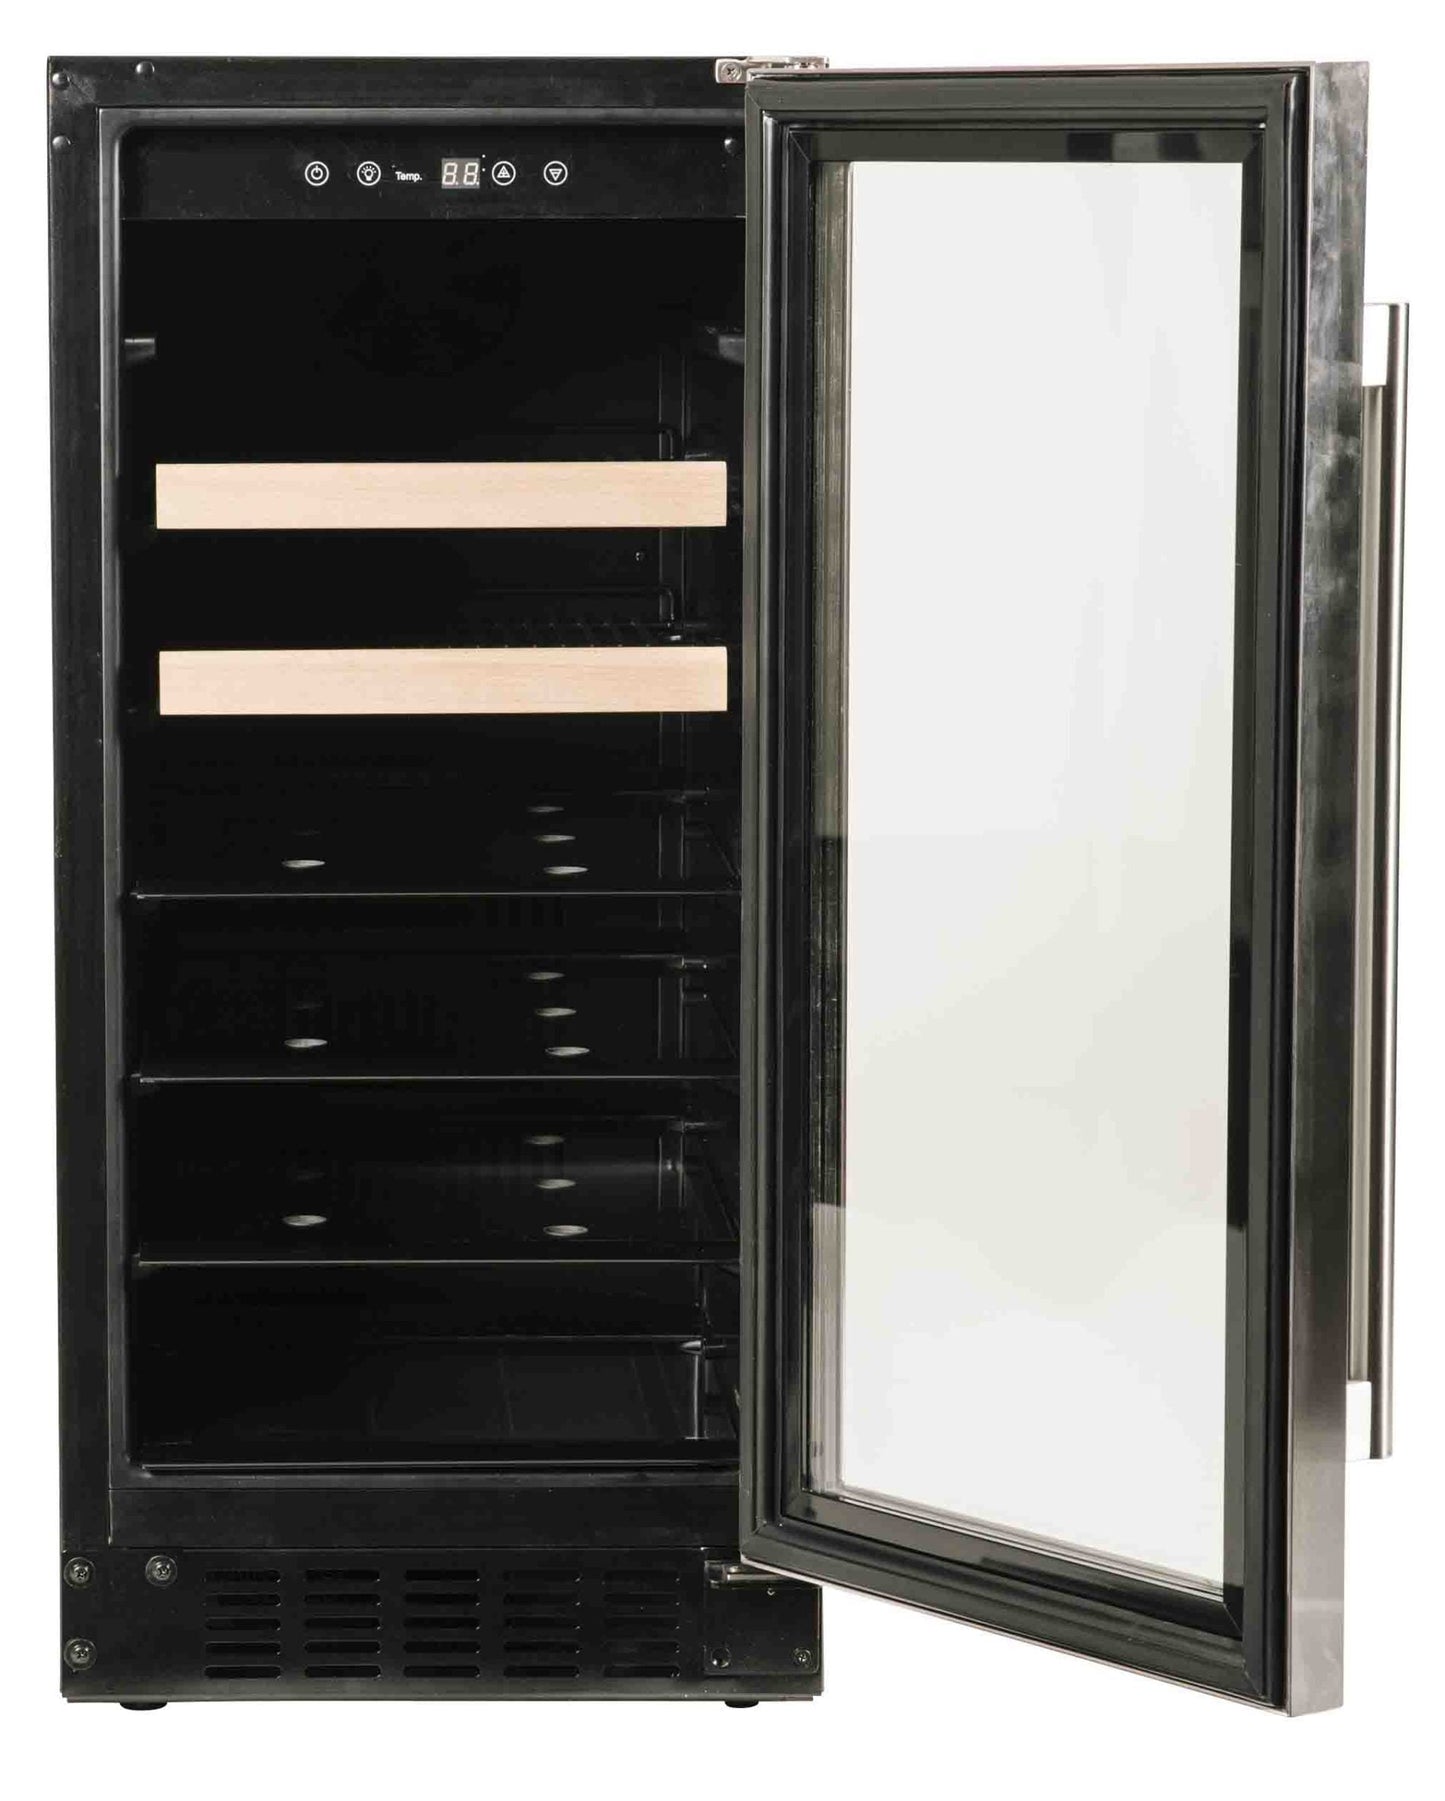 Azure Home Products A115BEVS Beverage Center 1.0 - 15" Glass Door W/ Stainless